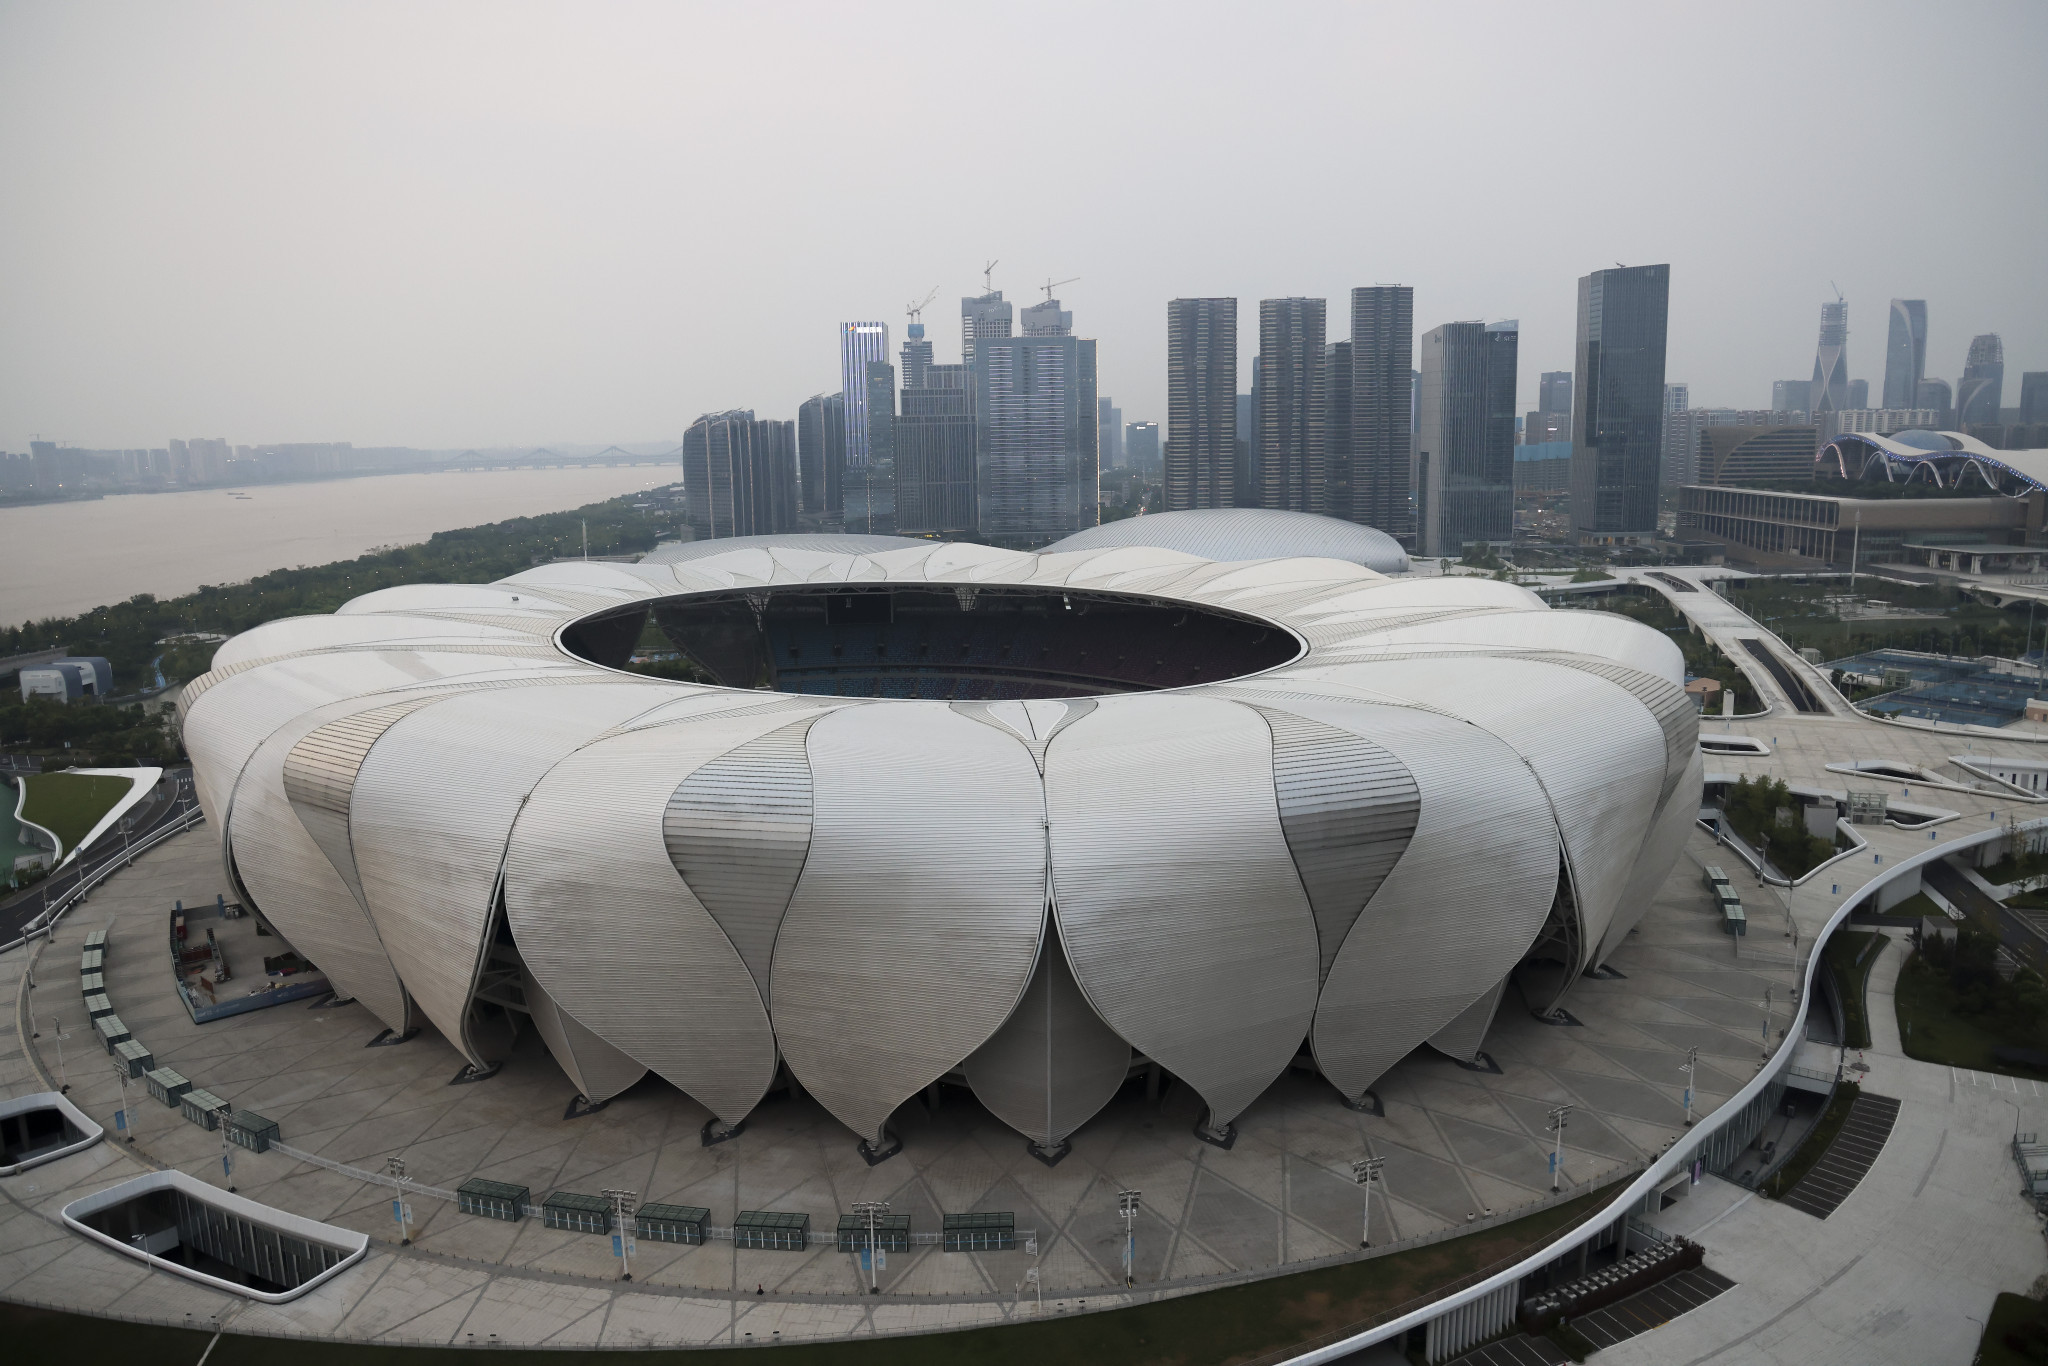 Hangzhou 2022 holds pre-registration meetings with Asian Games nations